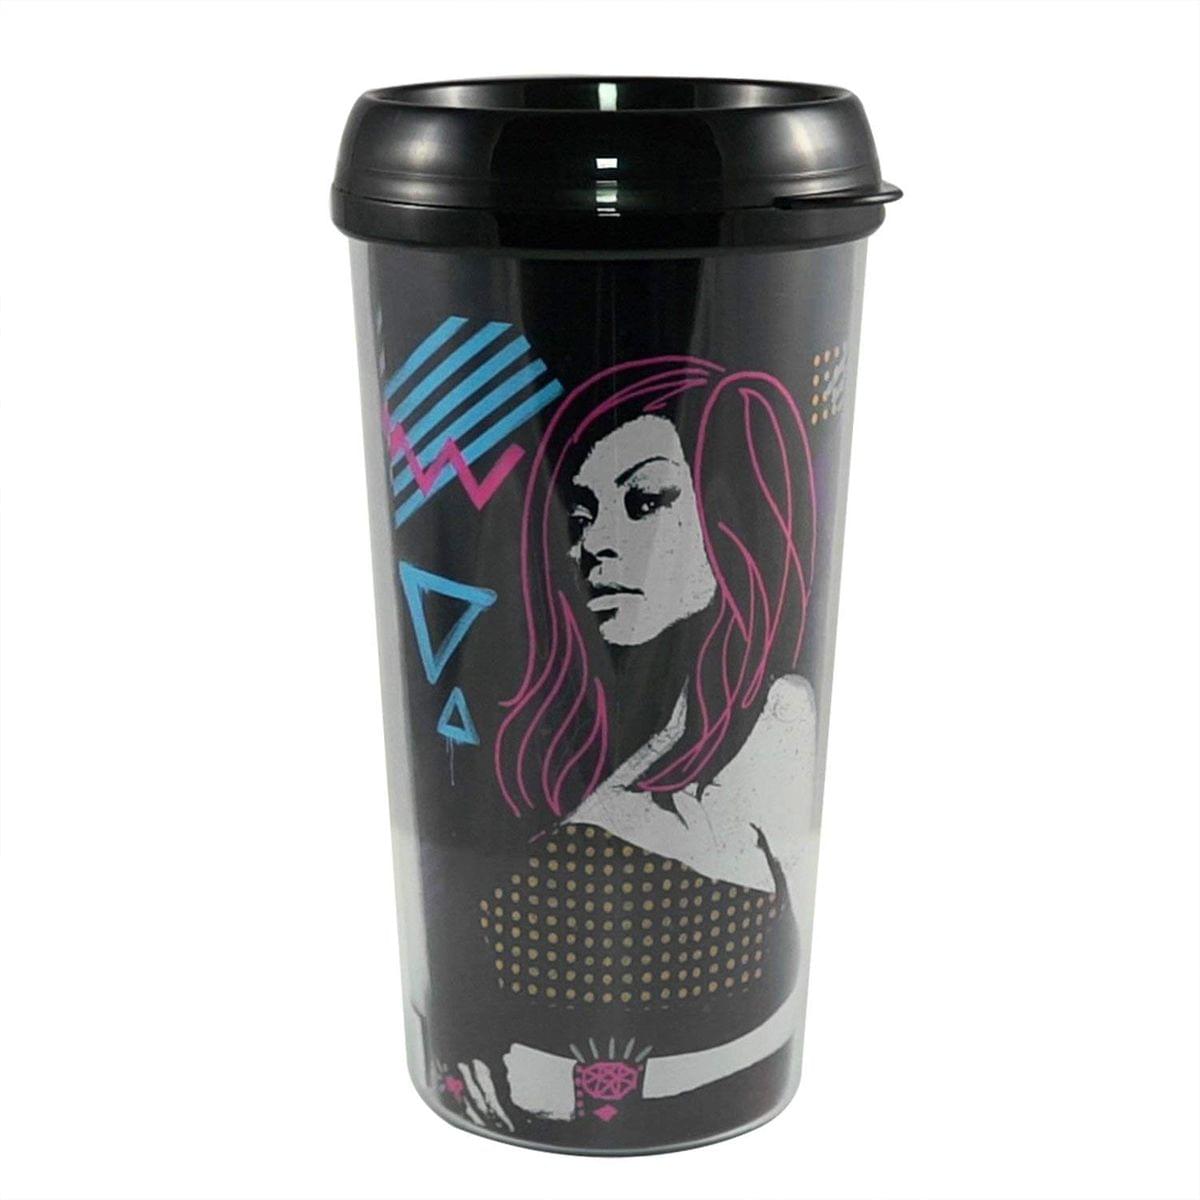 Empire Cookie "Messin with the Wrong Bitch" 16oz Travel Mug